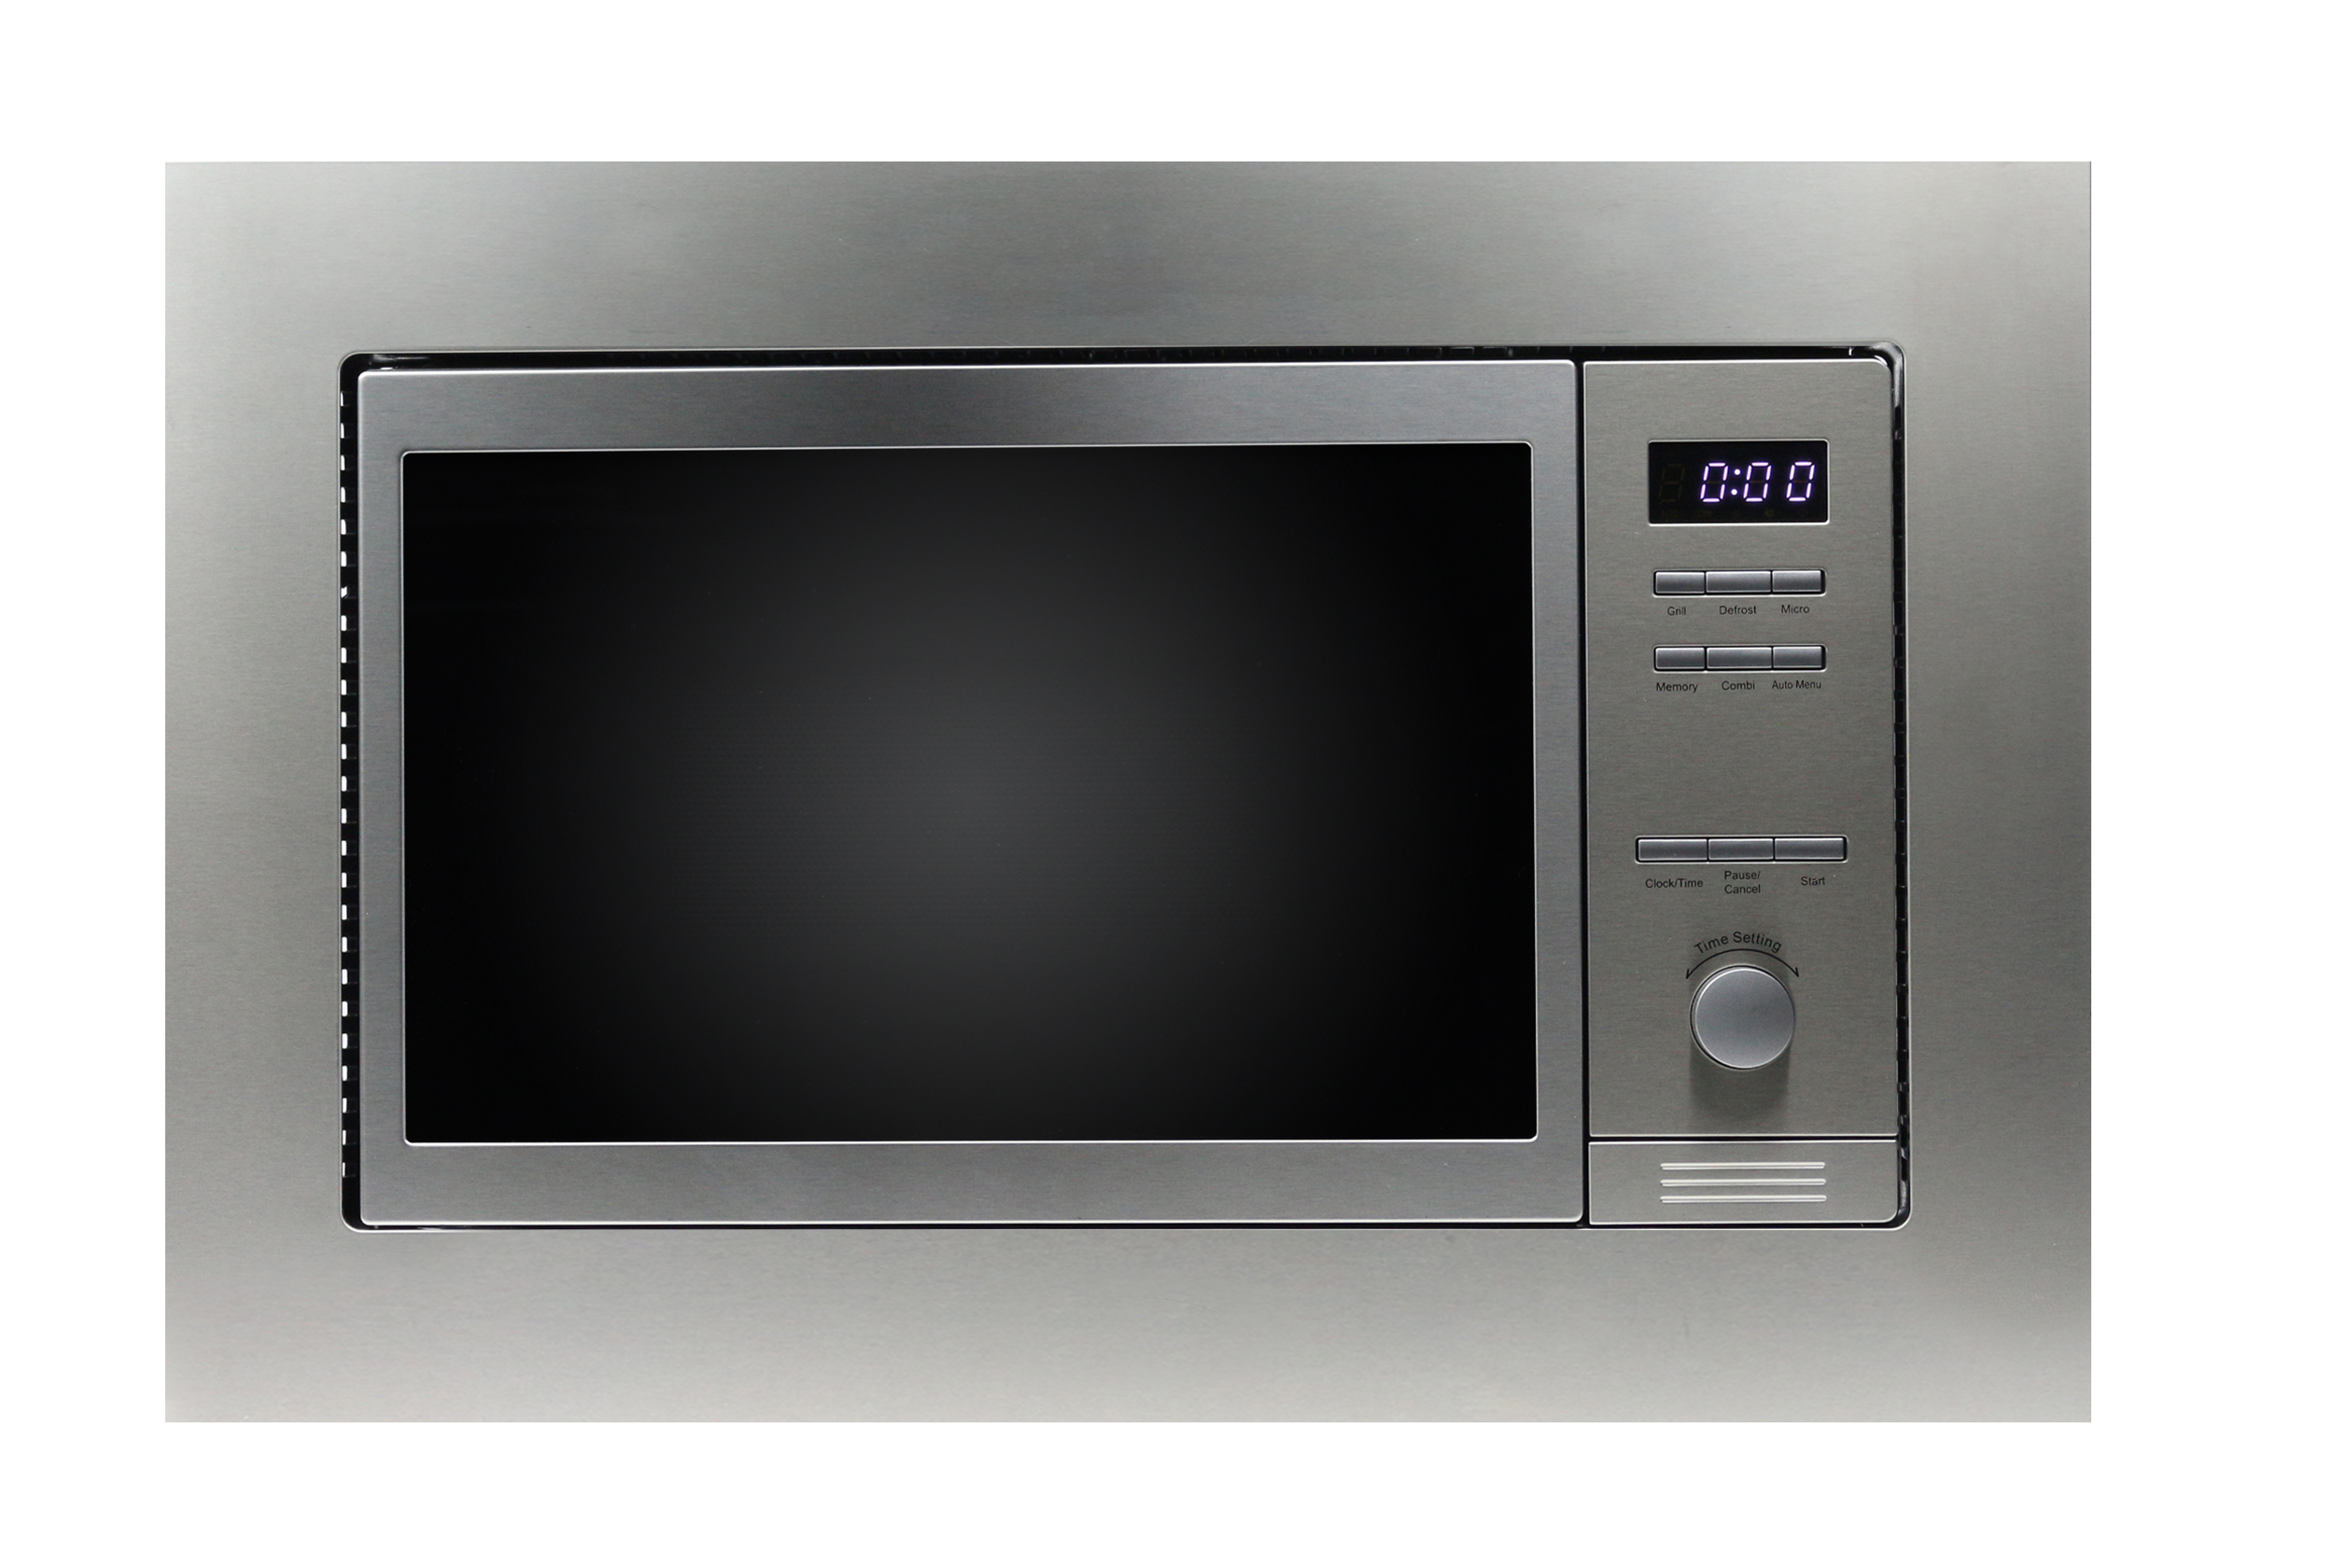 Combo Microwave+Oven 0.8 cu.ft - Stainless (Includes Trim Kit)